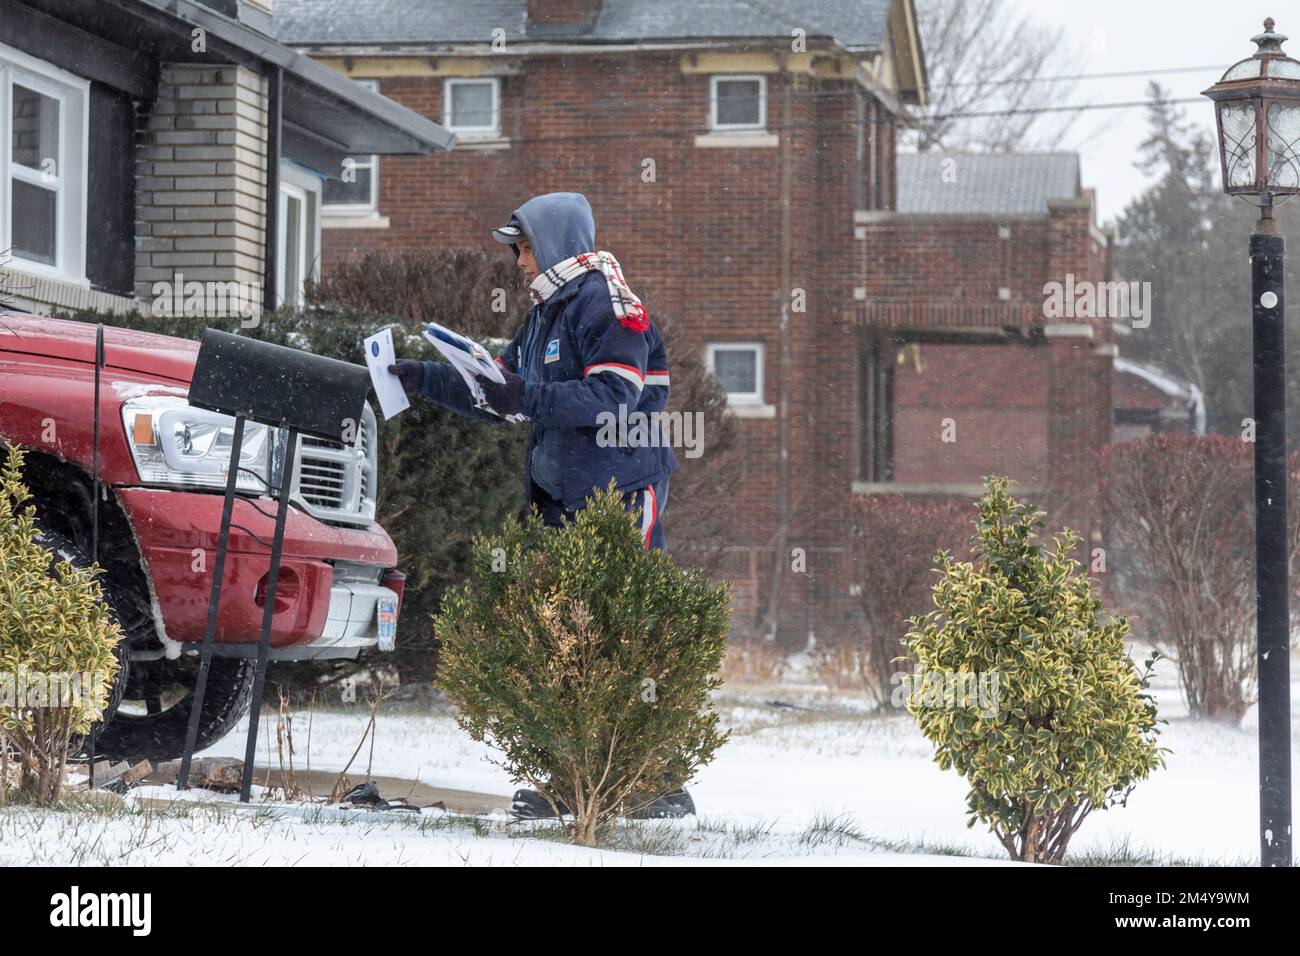 Detroit, Michigan, USA. 23rd Dec, 2022. Deborah Williams delivers the mail during a widespread winter storm that brought dangerous cold, snow, and wind to much of the United States. In Detroit, temperatures were near 0 degrees F, with the wind chill at -19 F. Credit: Jim West/Alamy Live News Stock Photo